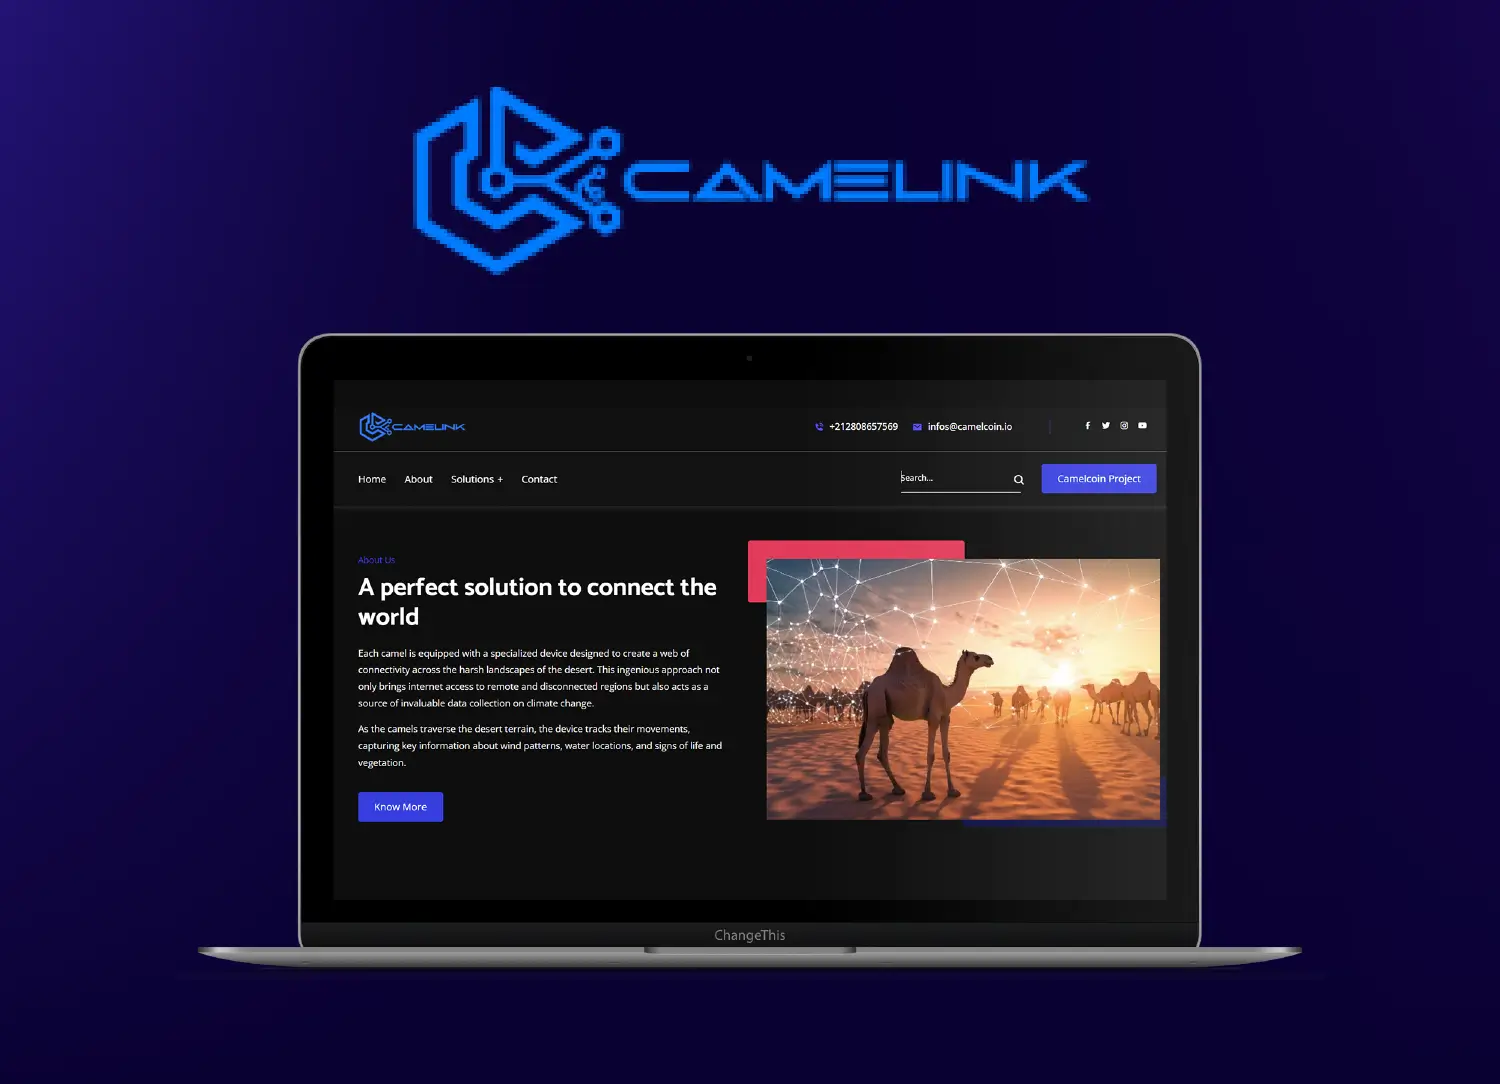 laptop screen show for the website of CameLink project is an innovative initiative that aims to enhance internet connectivity in remote desert regions